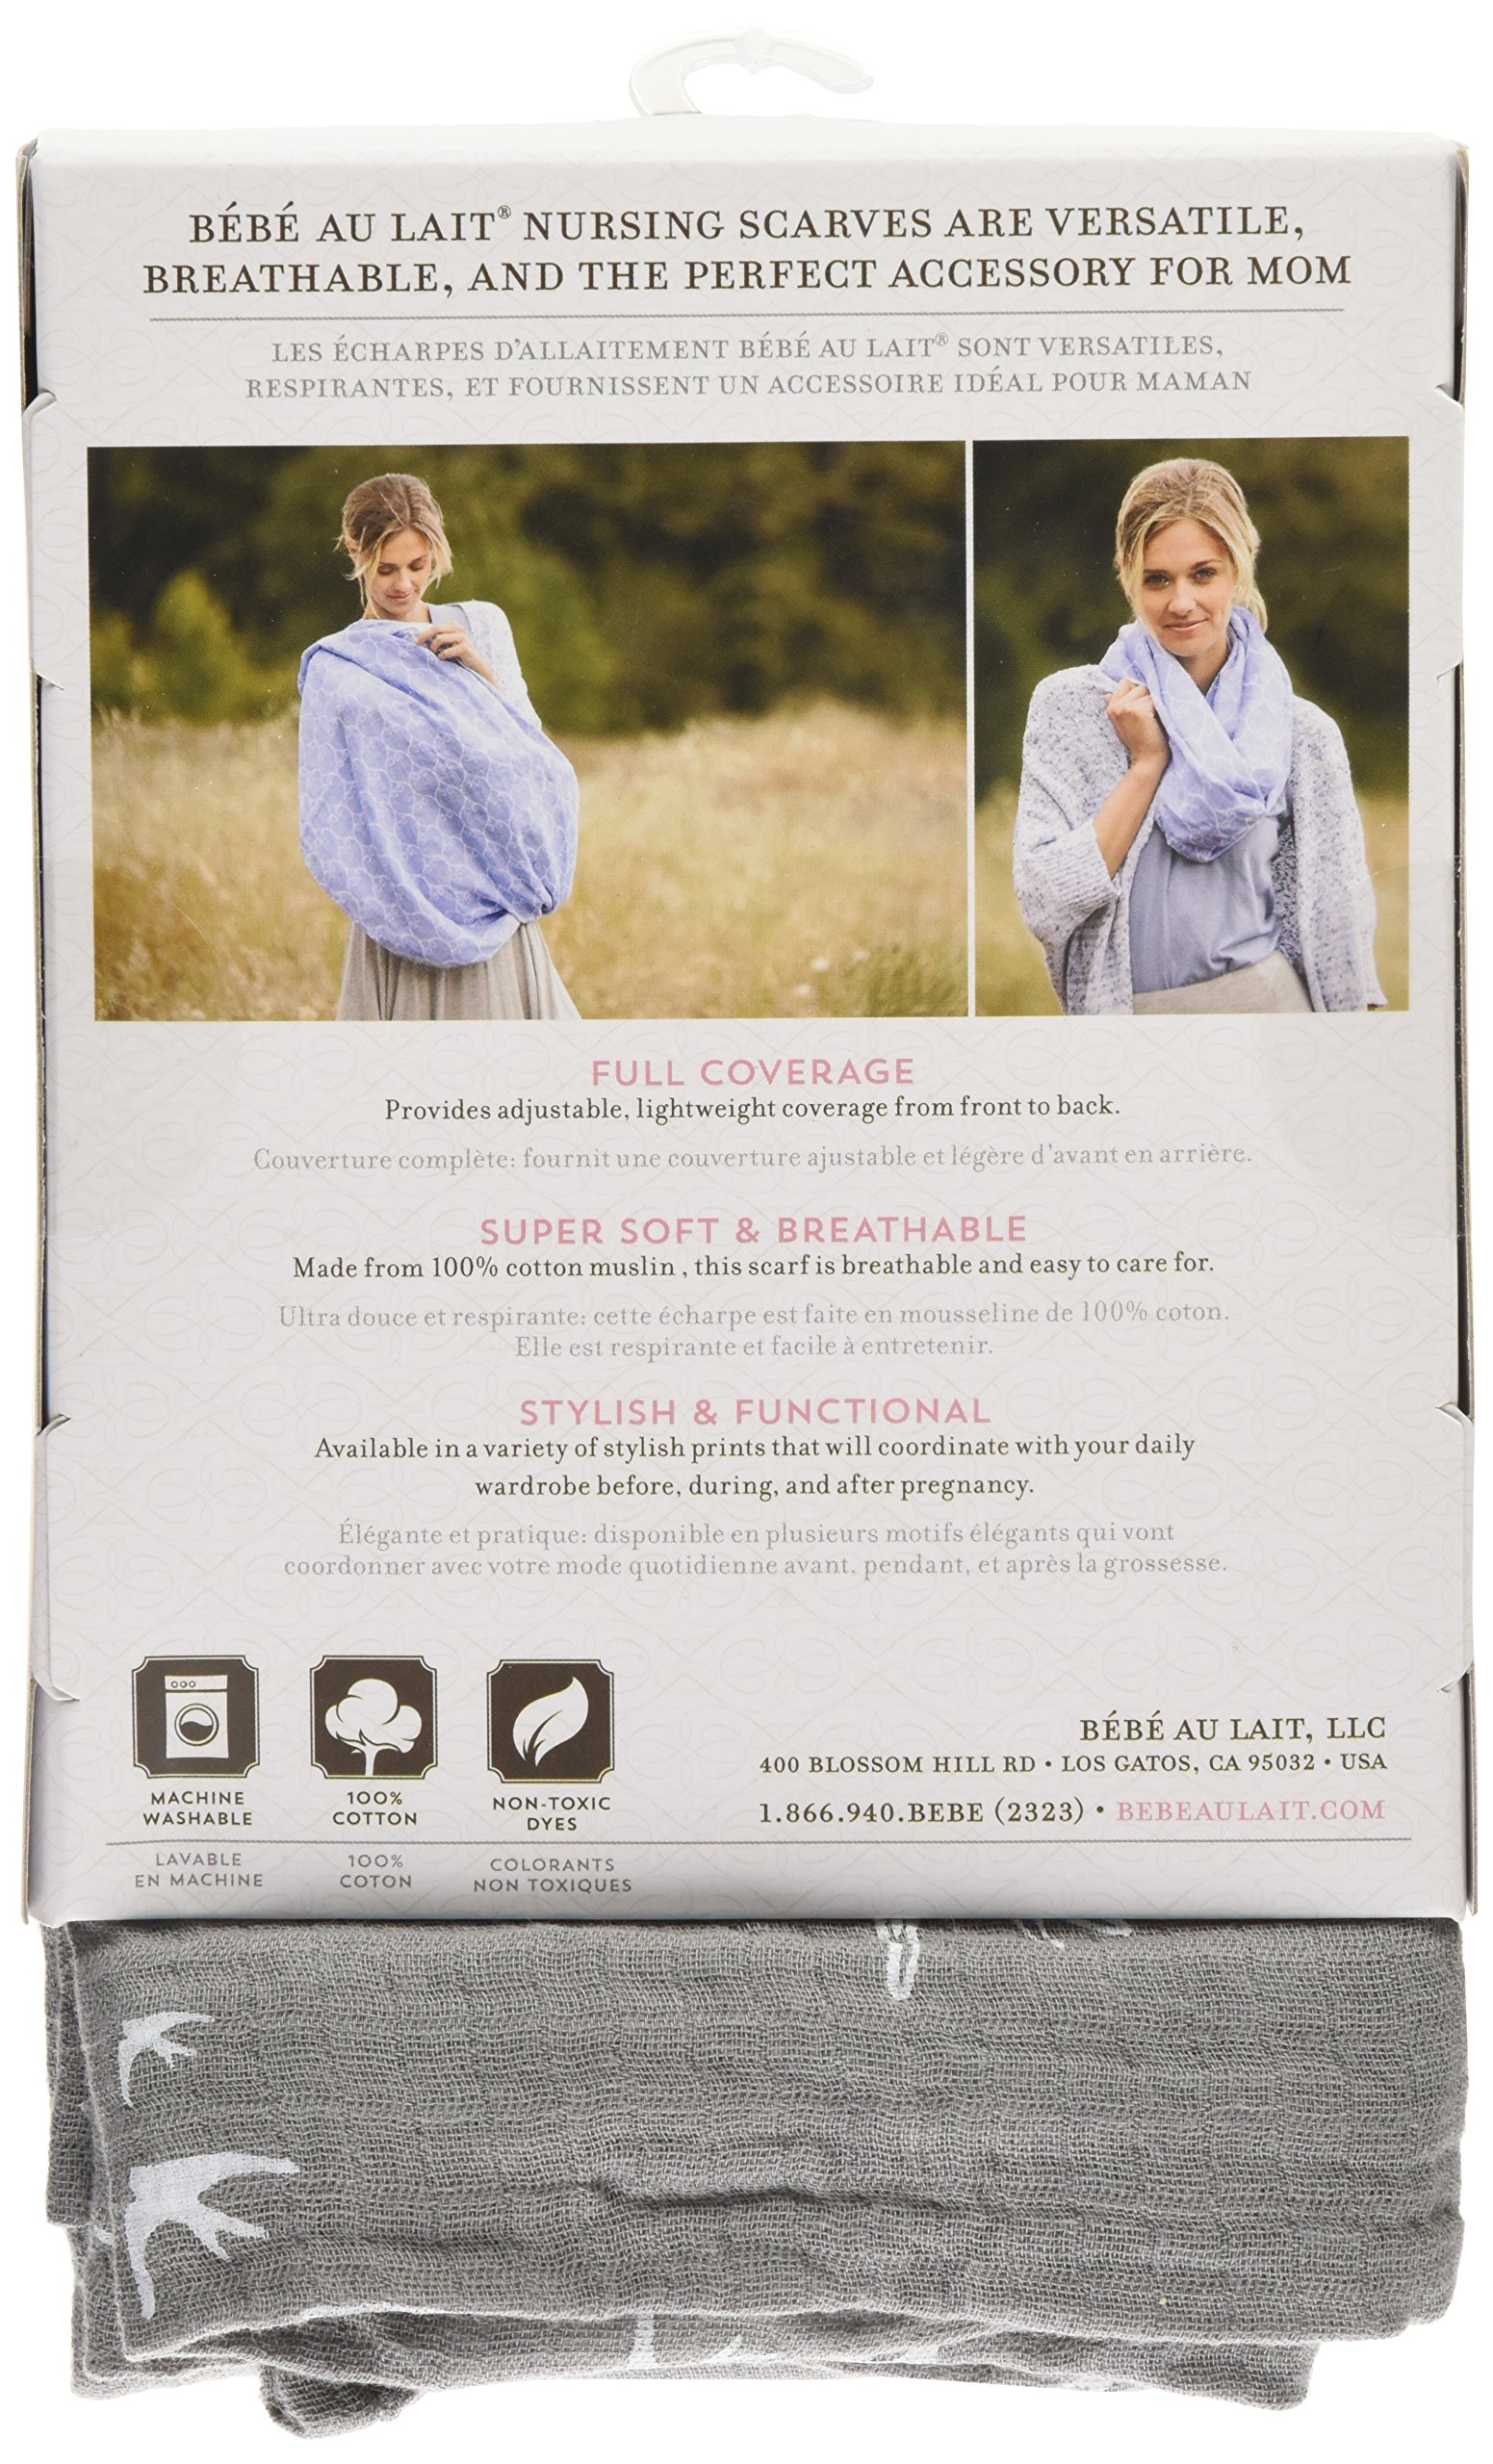 Bebe au Lait Premium Muslin Nursing Scarf, Lightweight and Breathable Cotton, One Size Fits All - Nightingale